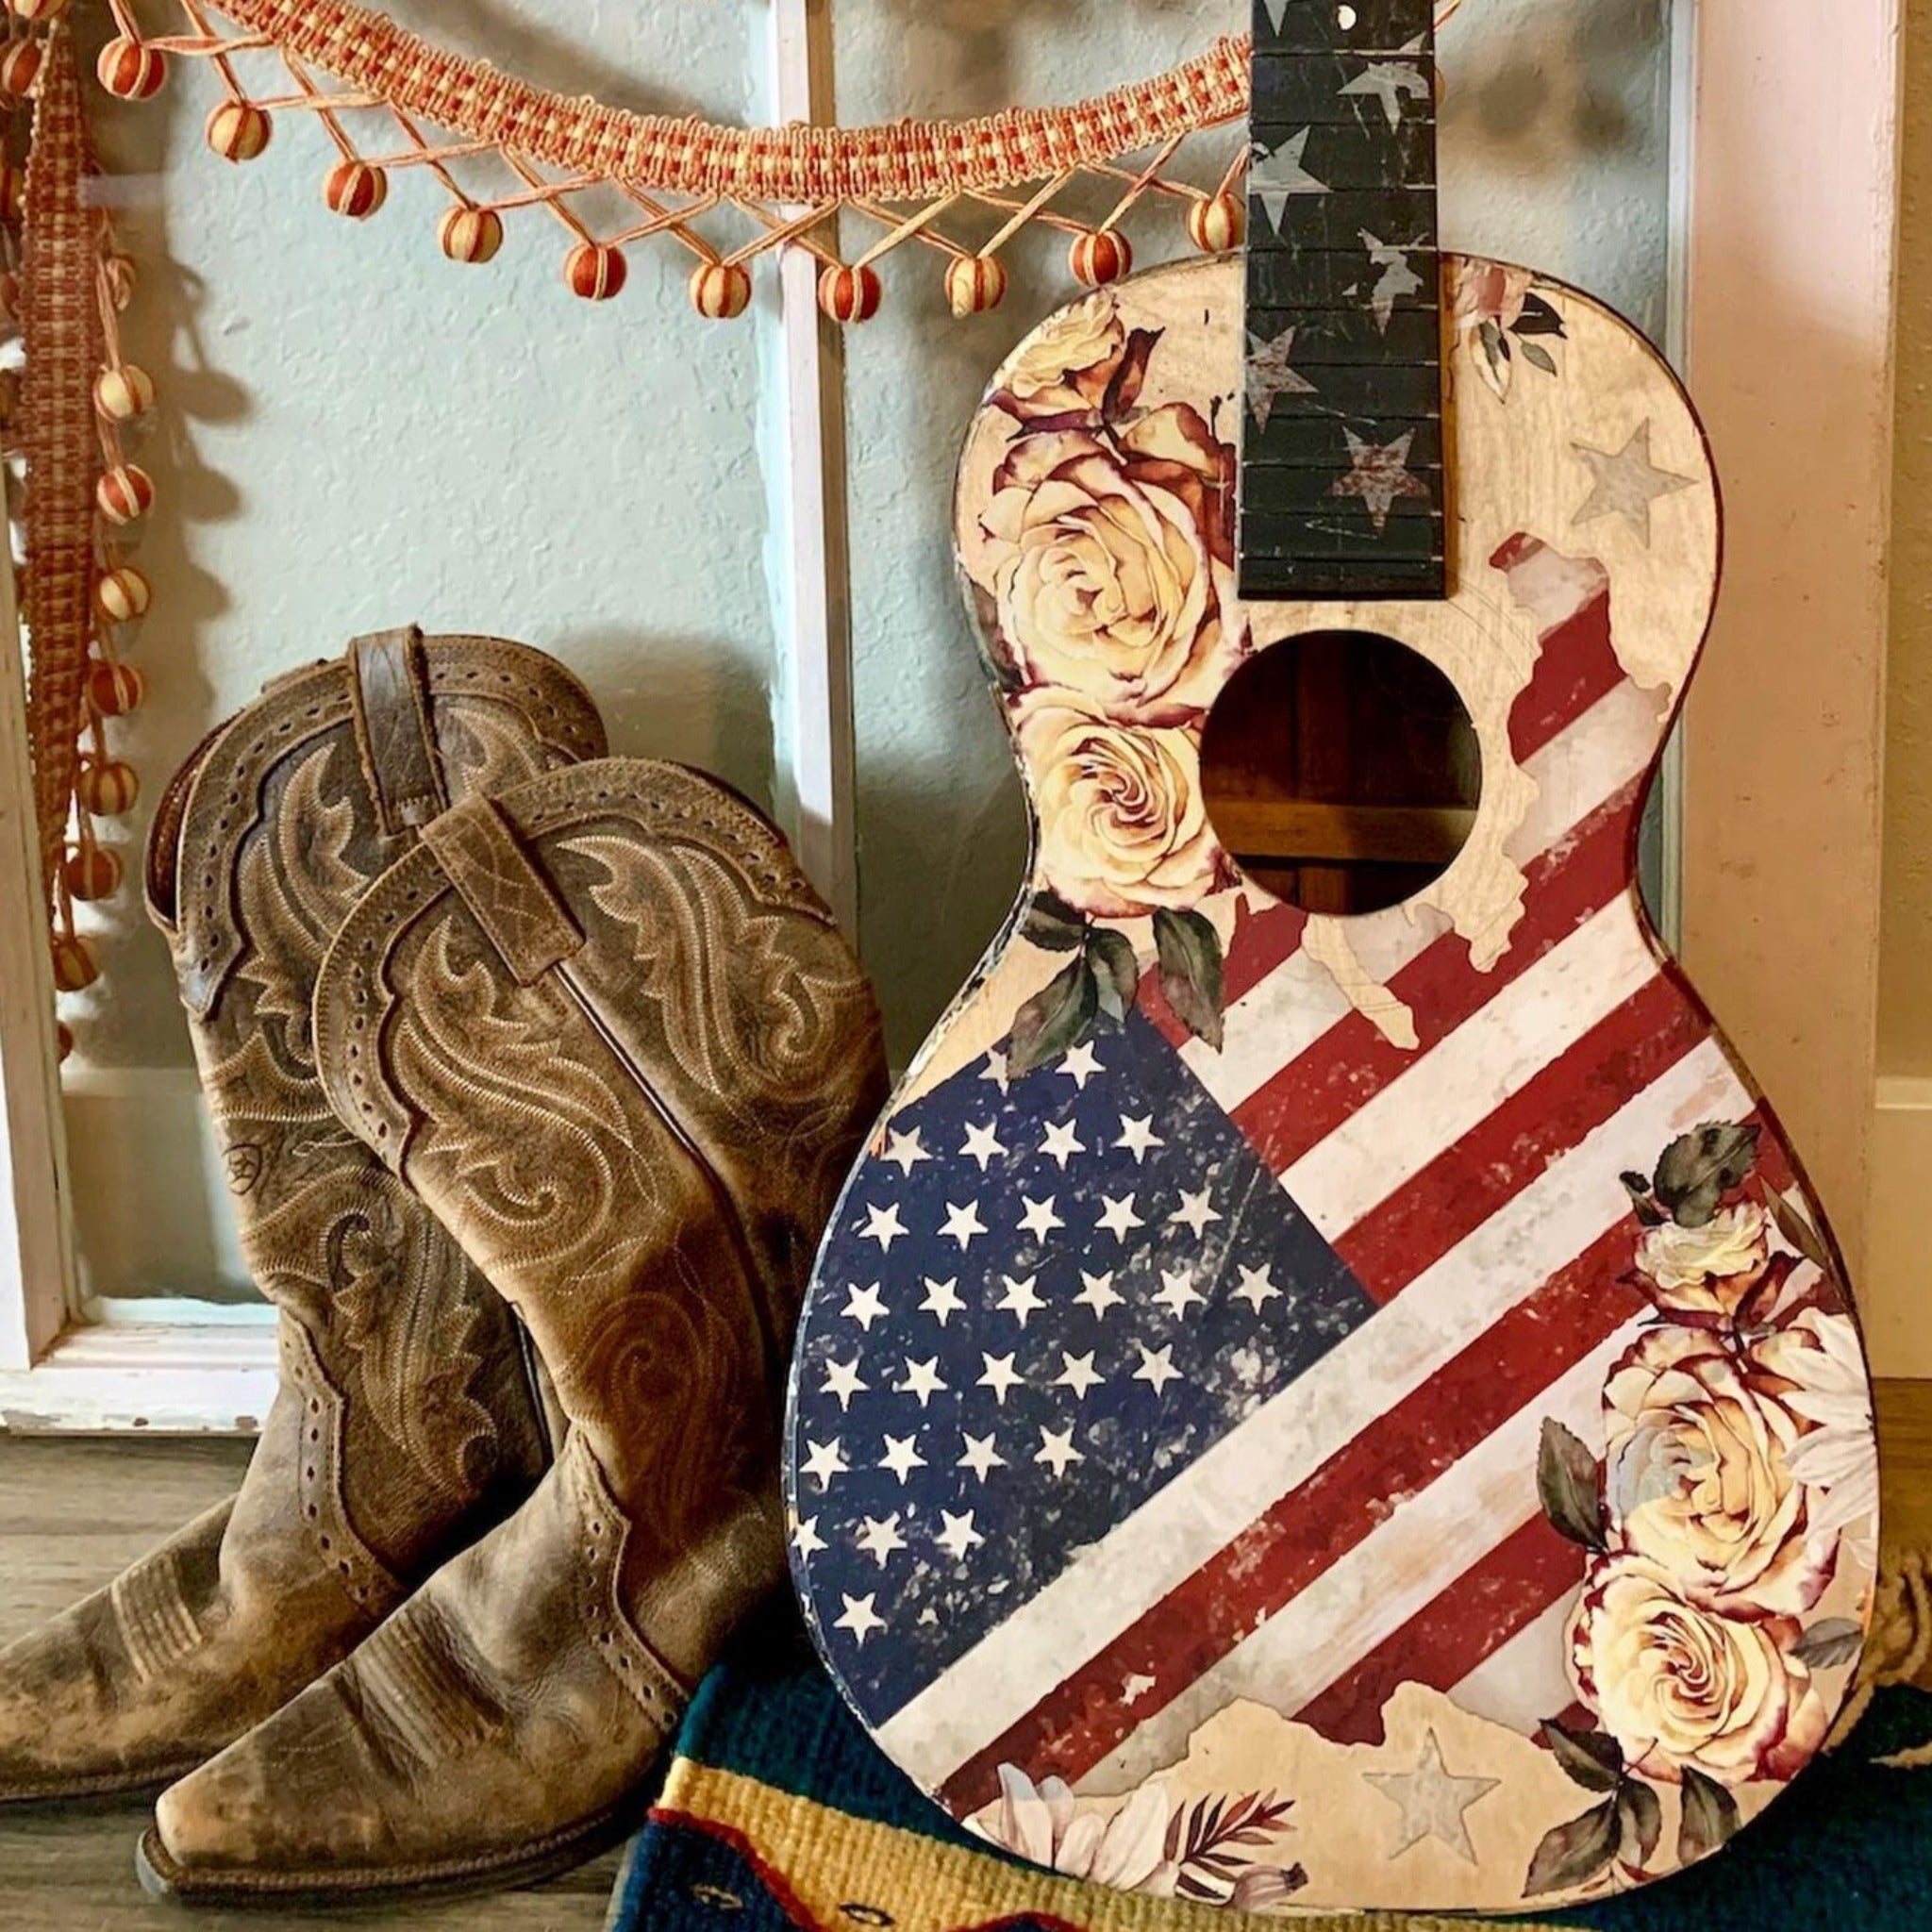 An acoustic guitar refurbished by Heartland Vintage Market features ReDesign with Prima's Sunflower Farms transfer on it along with an American Flag transfer. Cowboy boots sit to the left of the guitar.